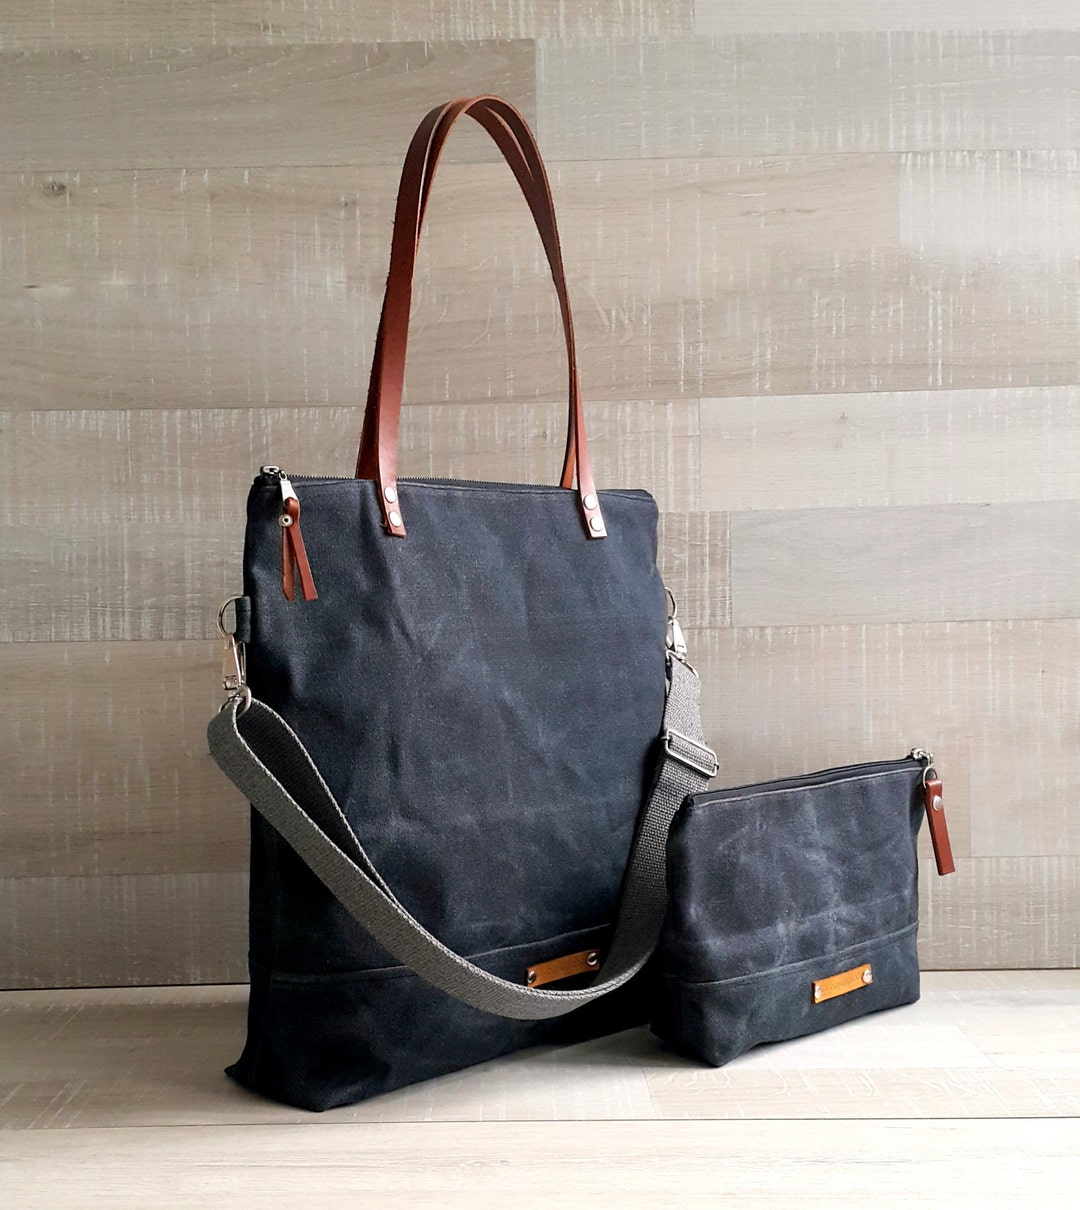 Waxed Canvas Tote Bag in Charcoal Milano Canvas Tote Bag - Etsy